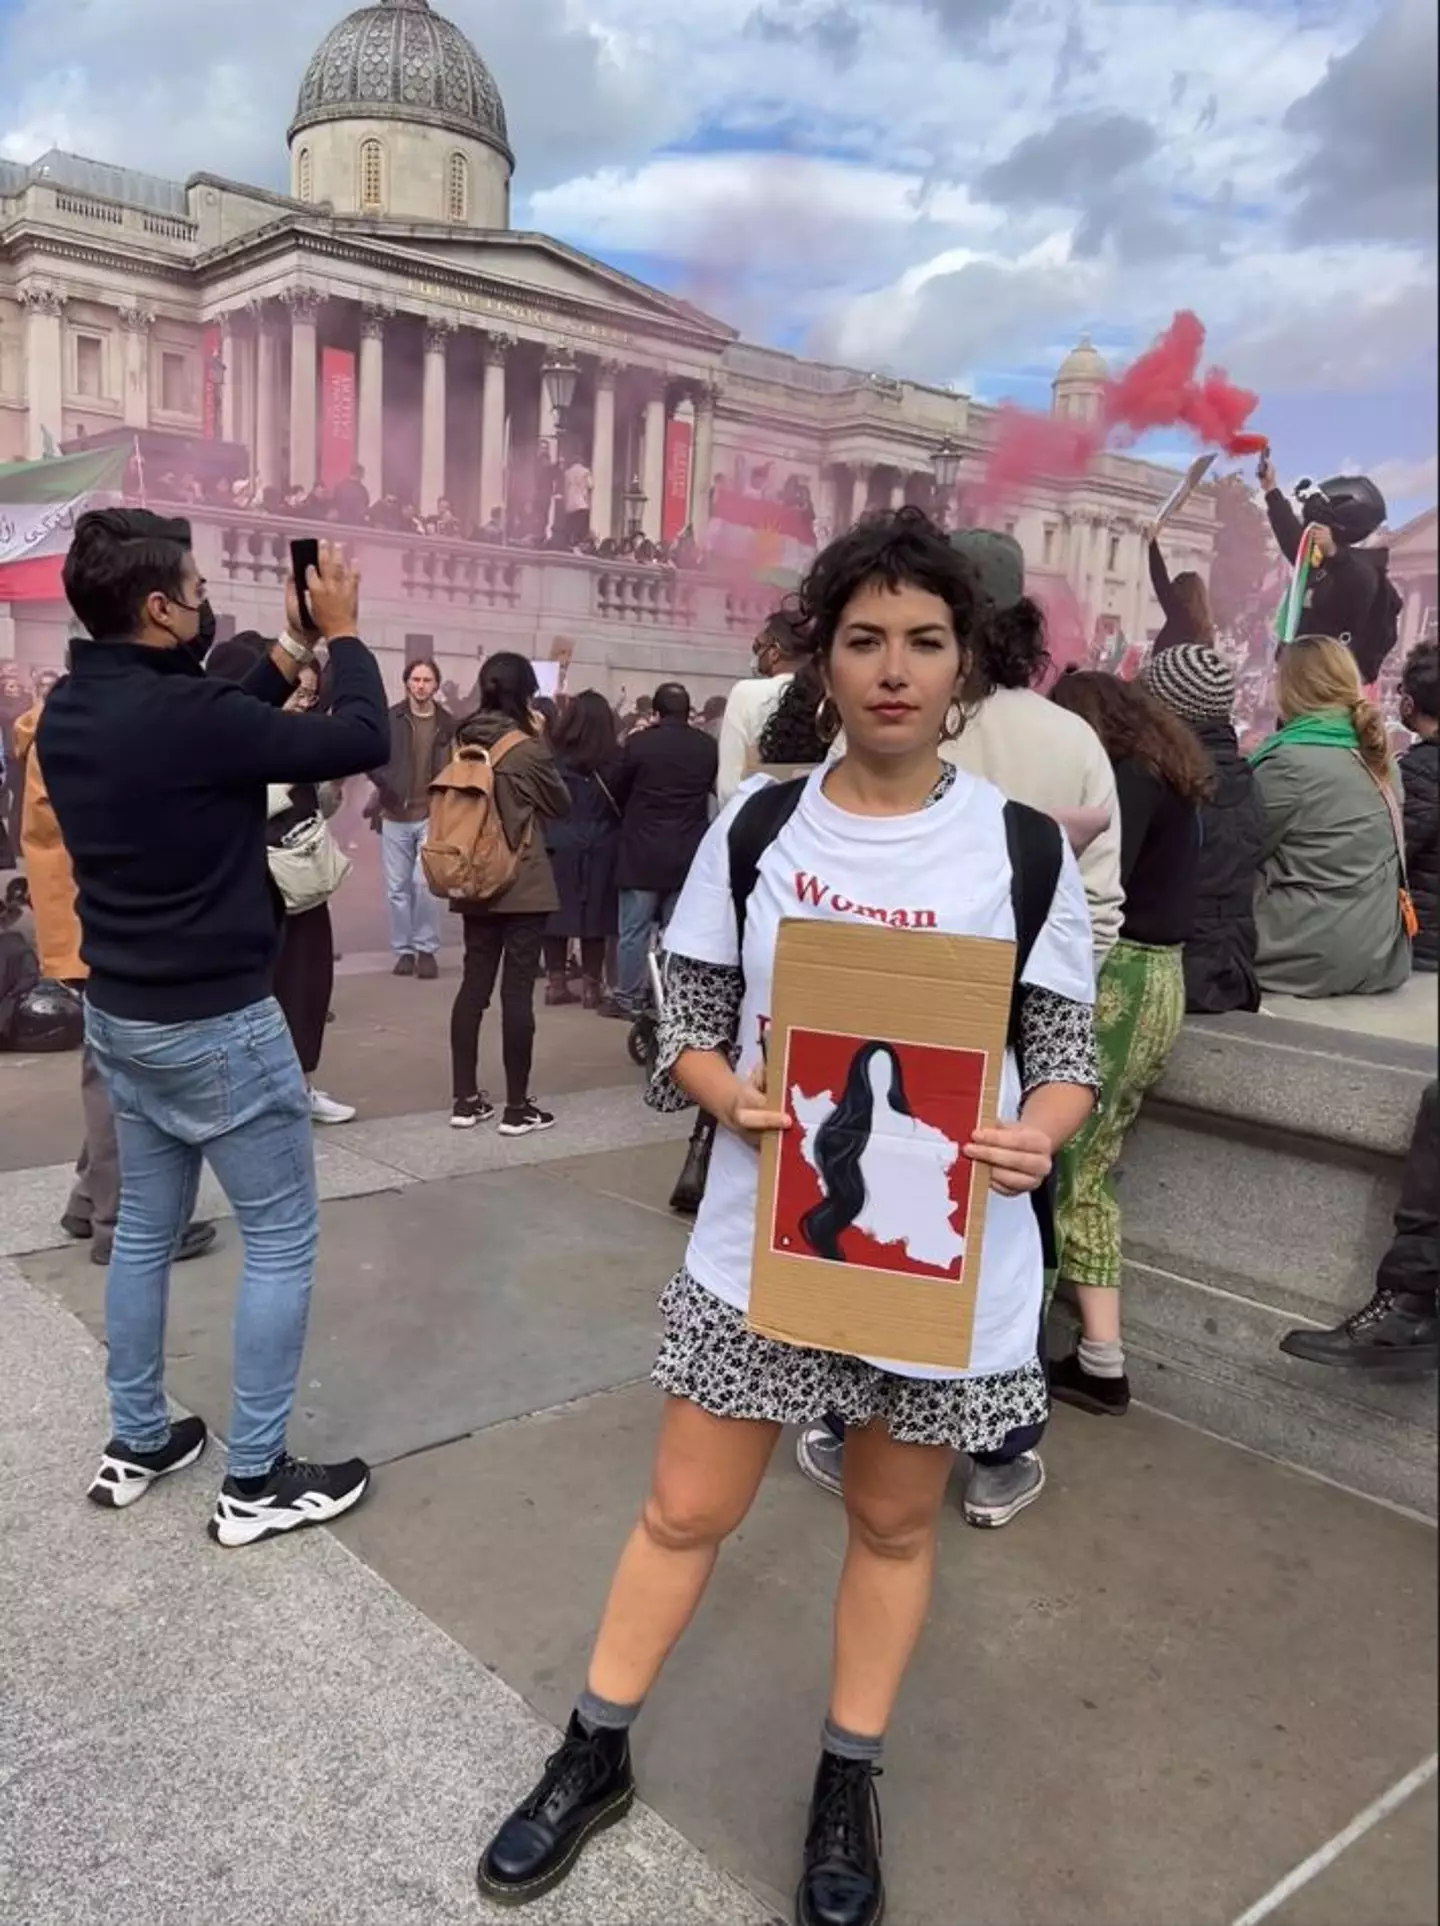 Sahar pictured in London earlier this month, protesting the death of Mahsa Amini.